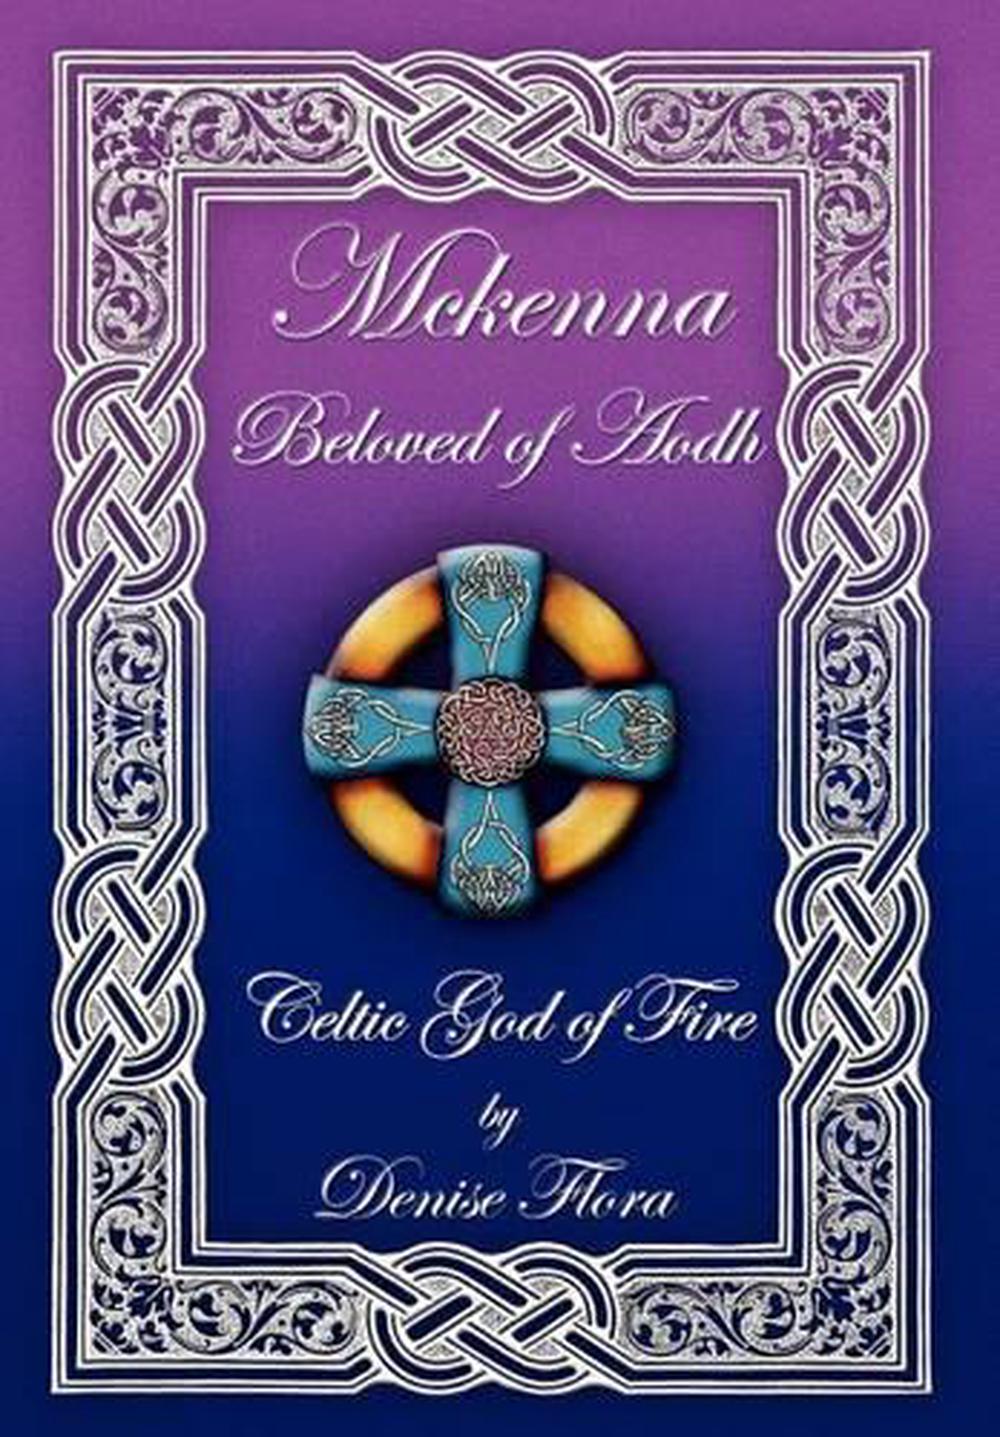 McKenna: Beloved of Aodh Celtic God of Fire by Denise Flora (English ...